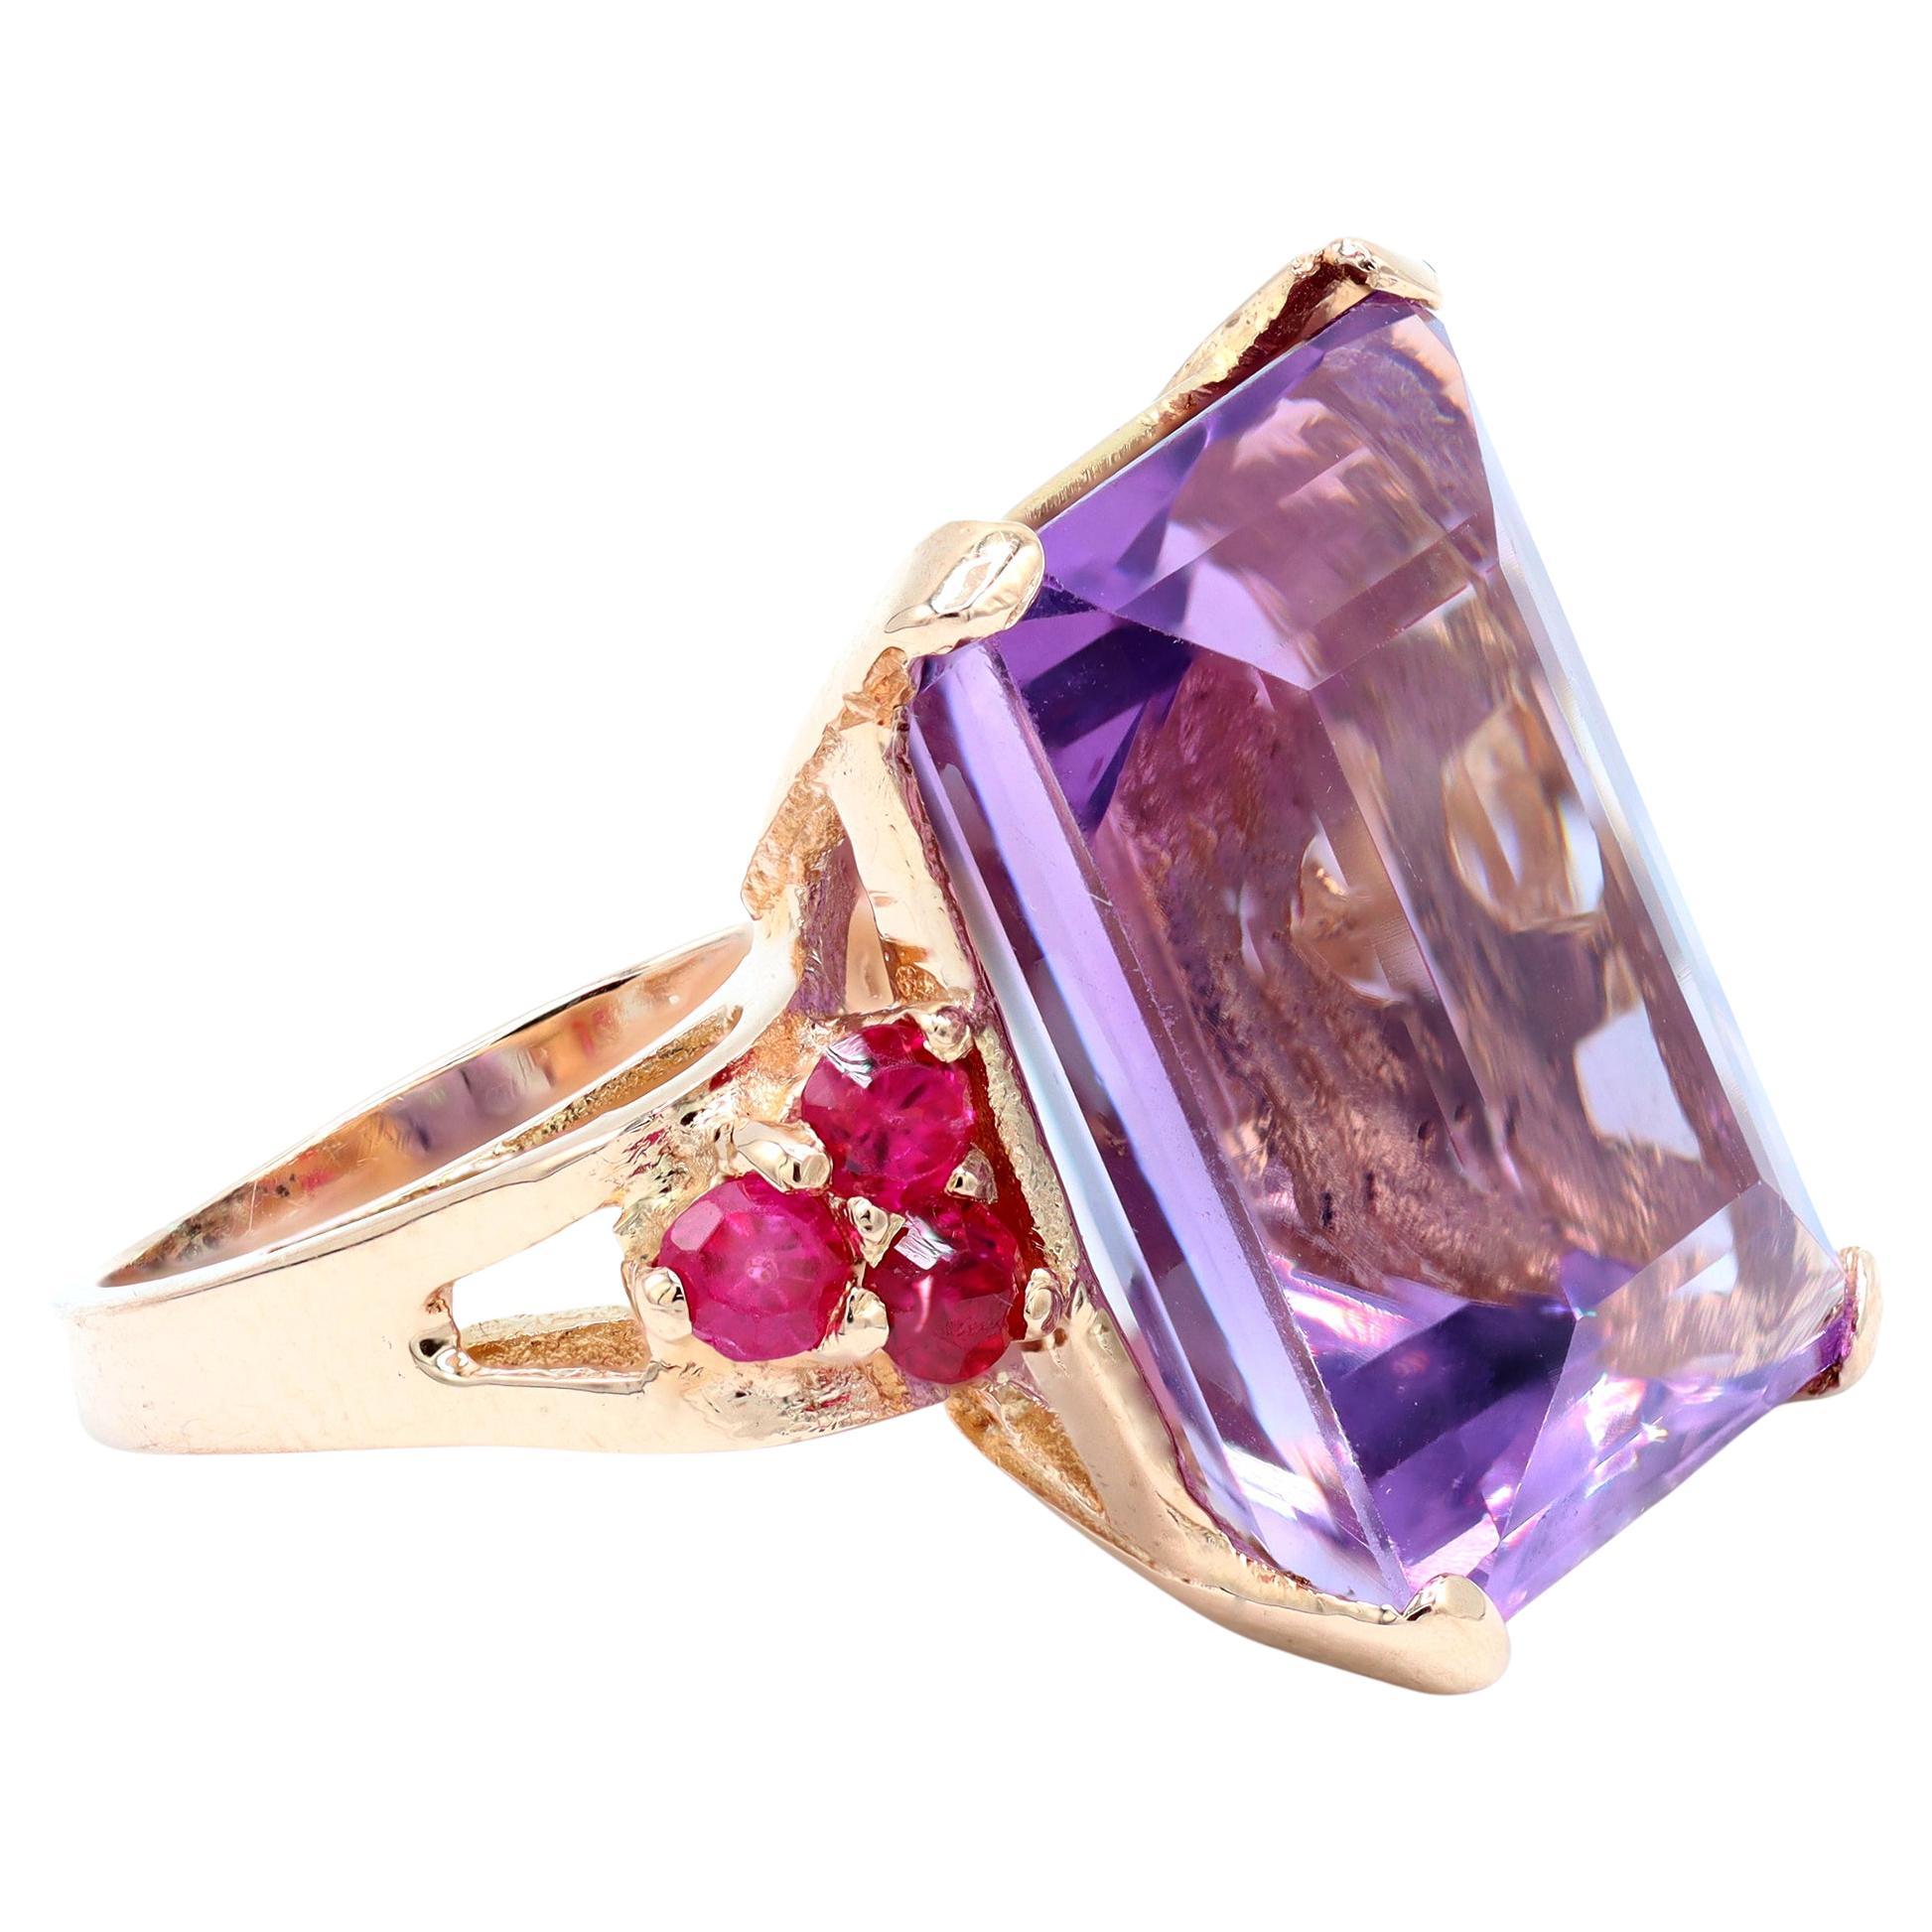 A statement Cocktail ring Circa 1940 featuring a step cut light purple amethyst accented with burma rubies on the shoulders. The retro ring is set in rose gold and has a gross weight of 8.4 grams. The Amethyst weighs approximately 14 carats, the